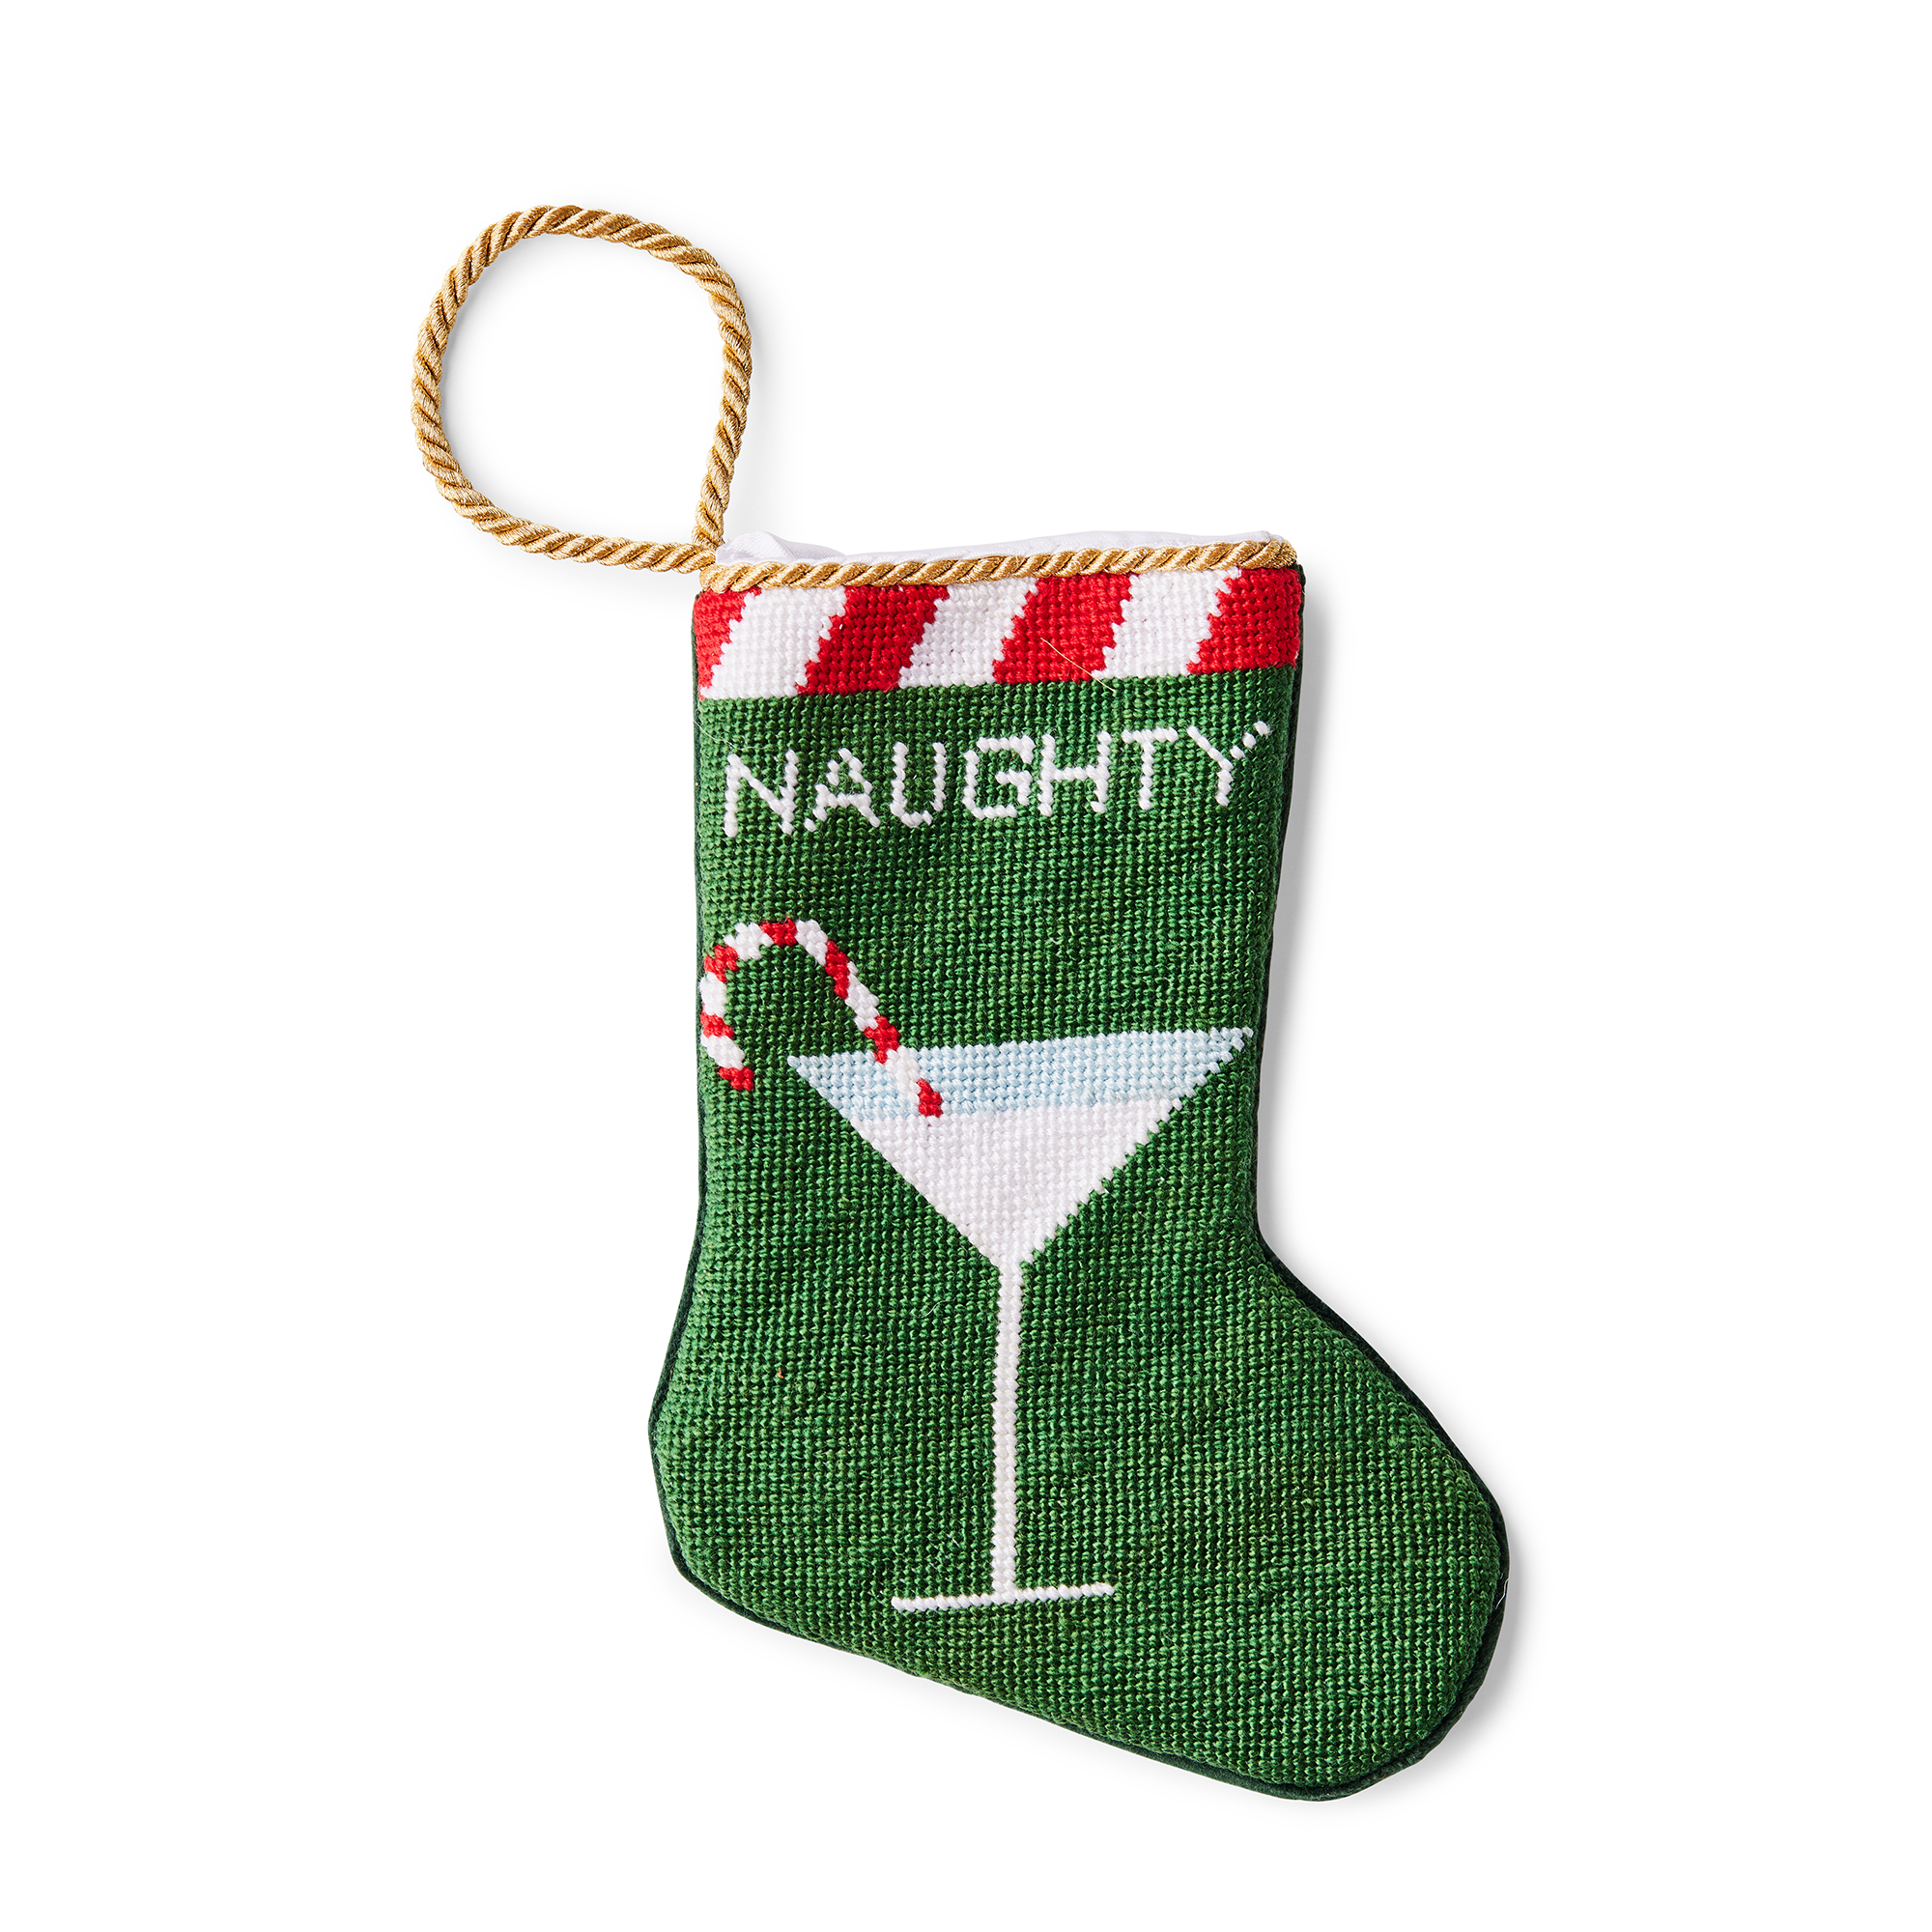 A small, intricately designed needlepoint stocking featuring an illustration of a martini glass with a playful twist - lollipop garnish, set against a holiday green background with red and white details. A gold loop at the top makes it perfect as a tree ornament, place setting, or for hanging by the fireplace.